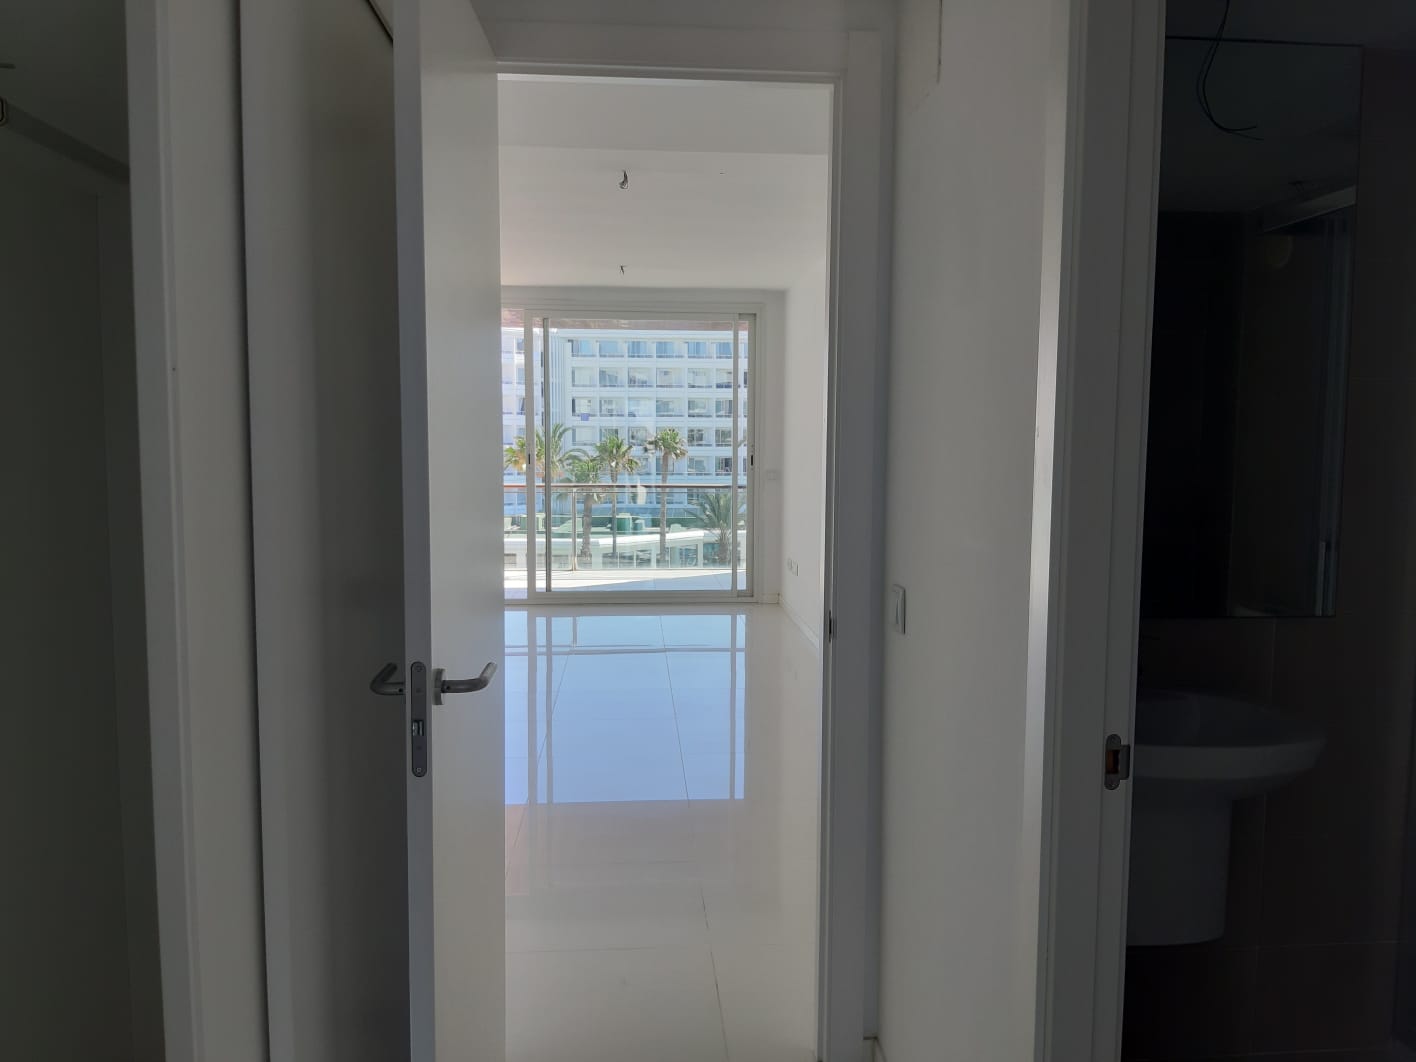 Modern 2 bedroom apartment with great potential by the sea in Playa d’en Bossa